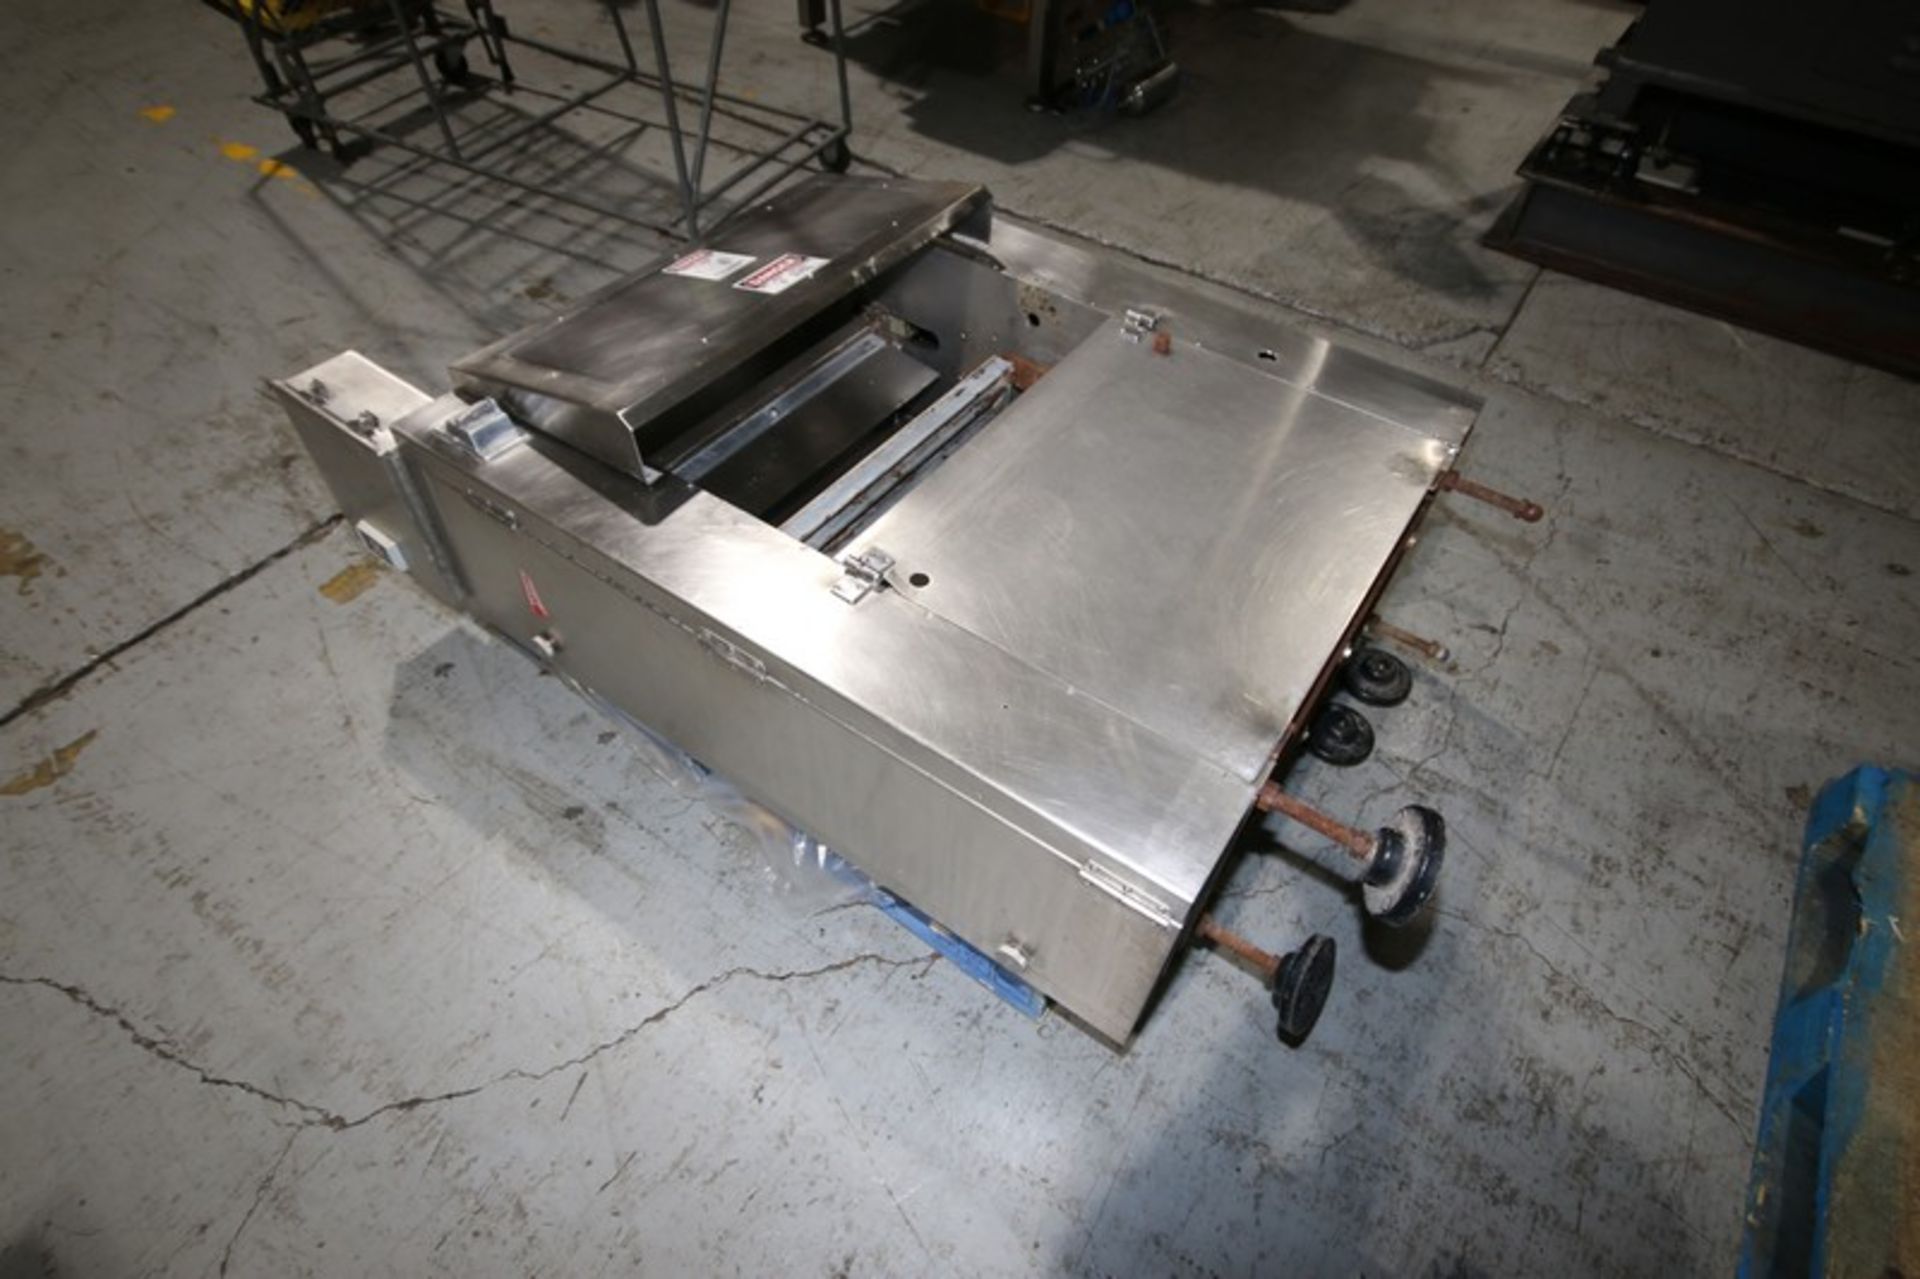 Moline 23-1/2" W S/S Guillotine, with Aprox. 24-1/2" L x 8-1/2" W Cutting Table, Mounted on S/S